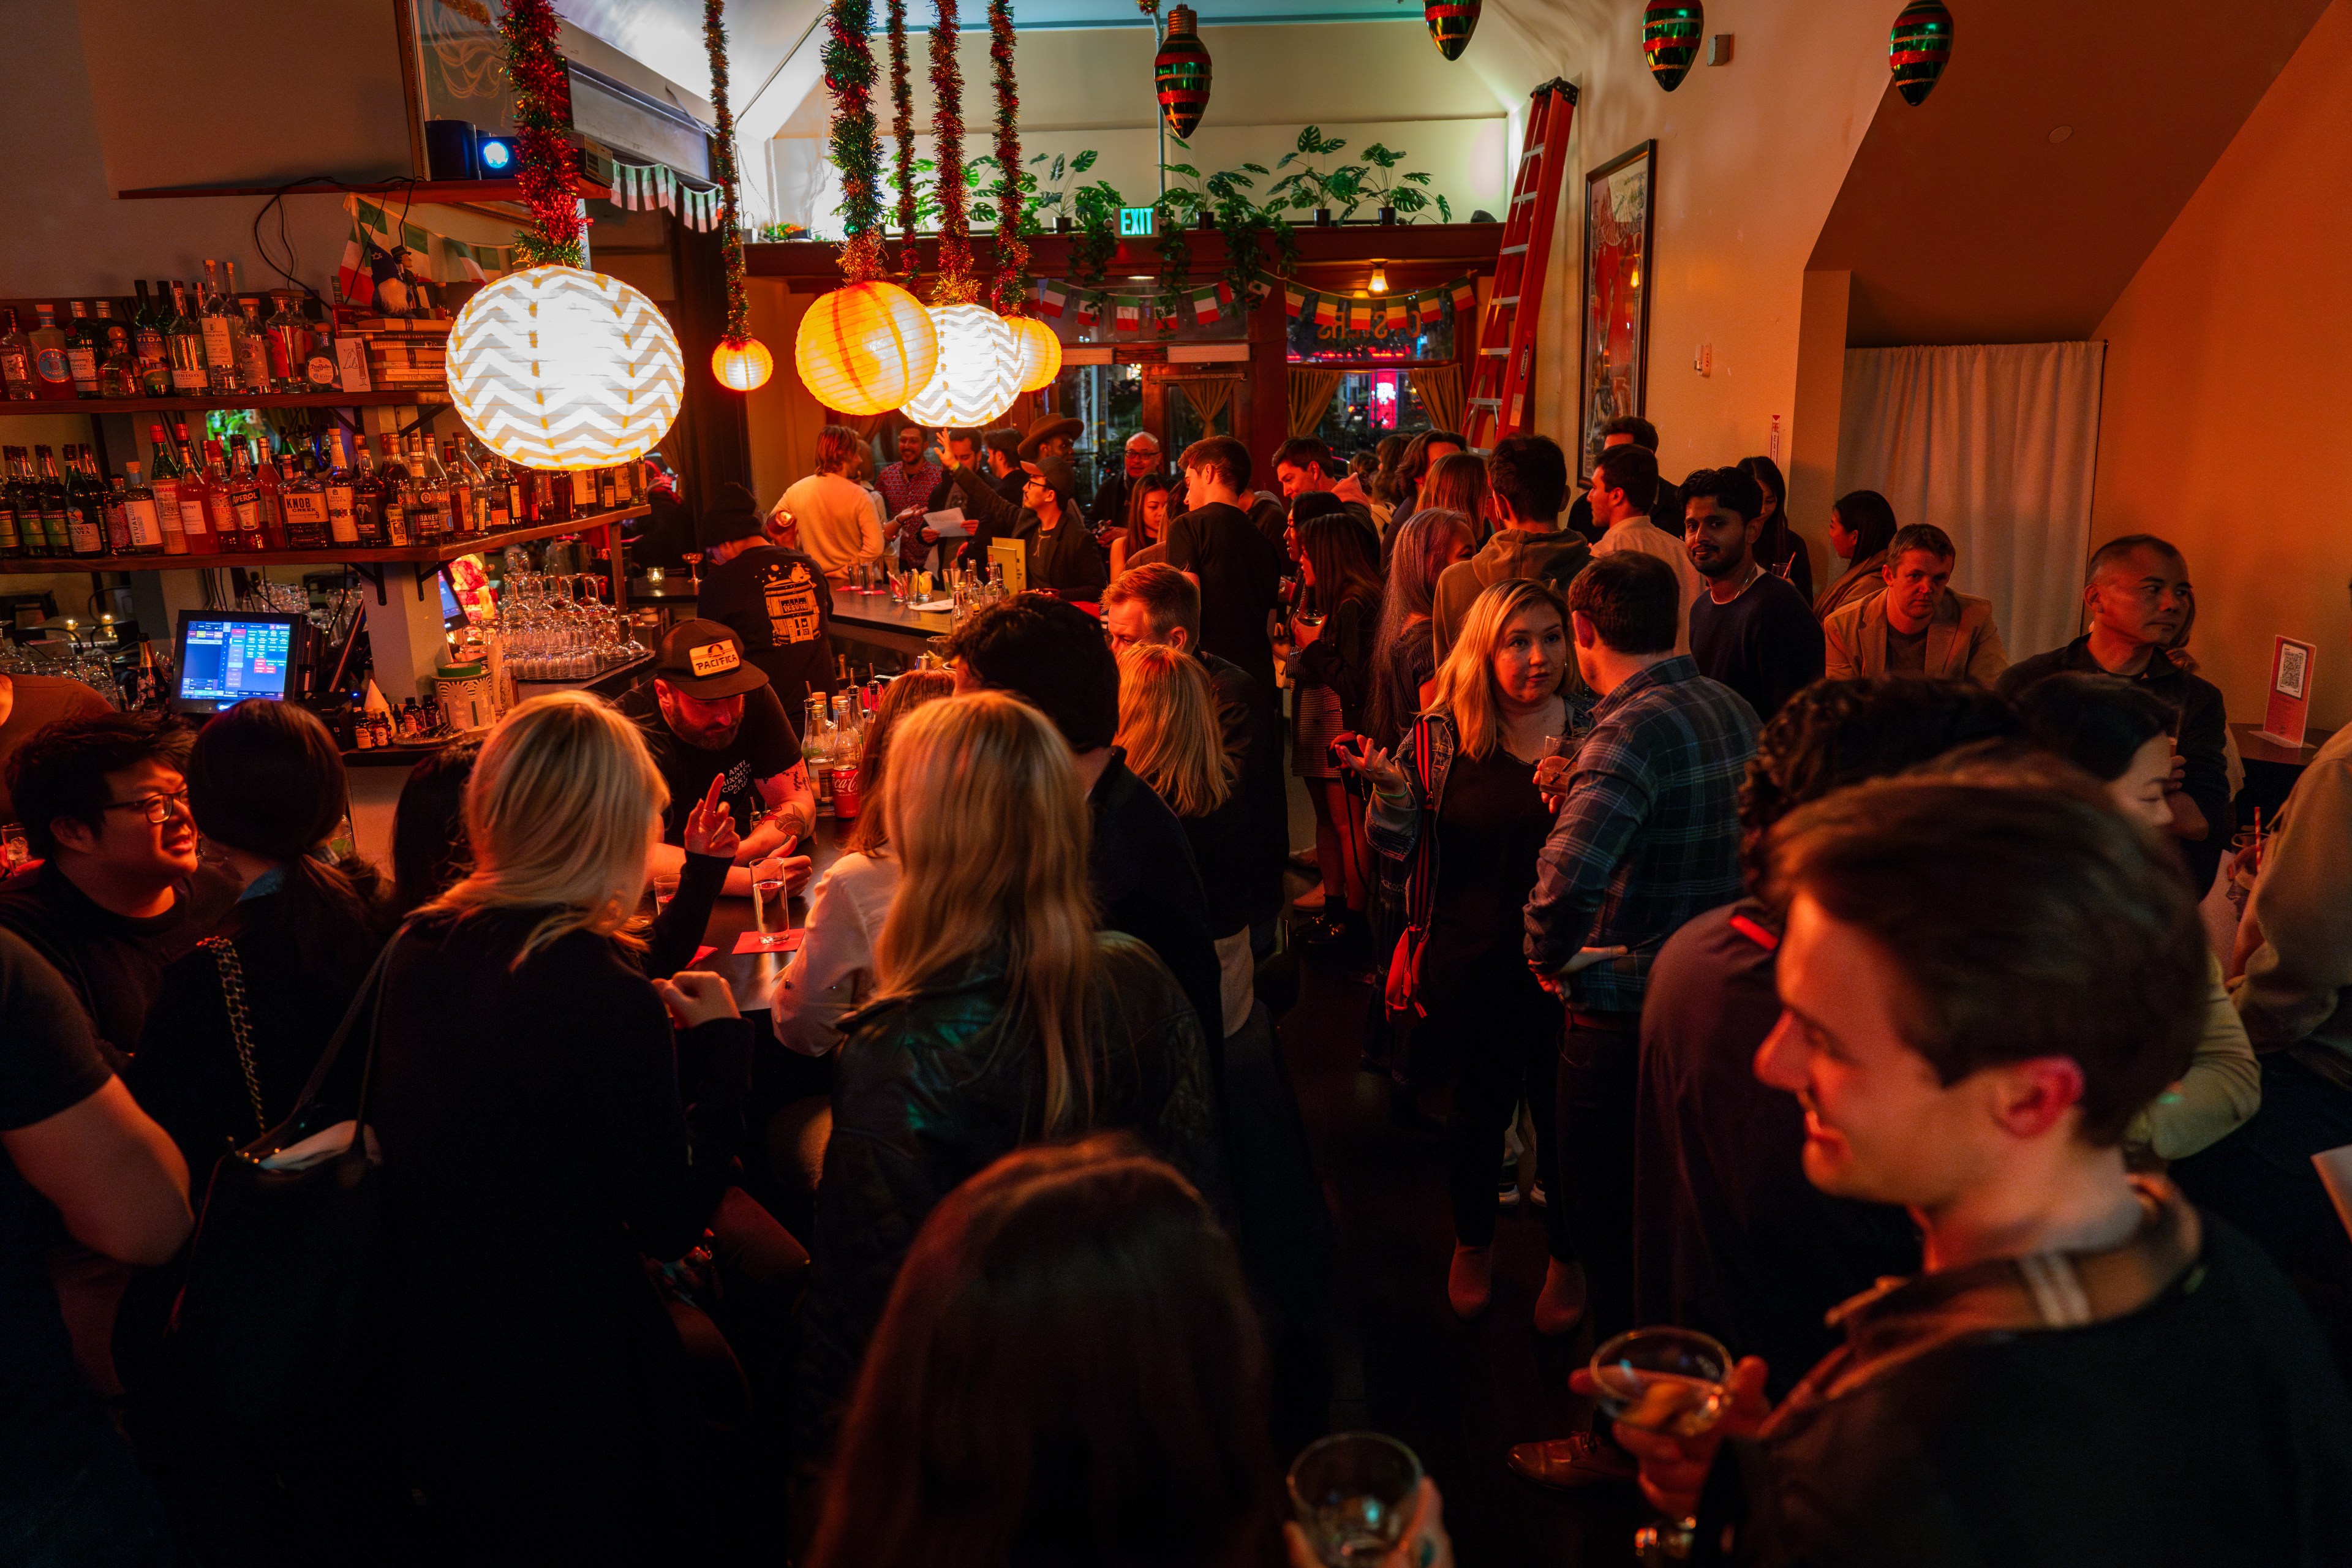 People gather in a crowded bar with low-hanging lights wrapped in tinsel and leftover Christmas ornaments hanging form the ceiling.